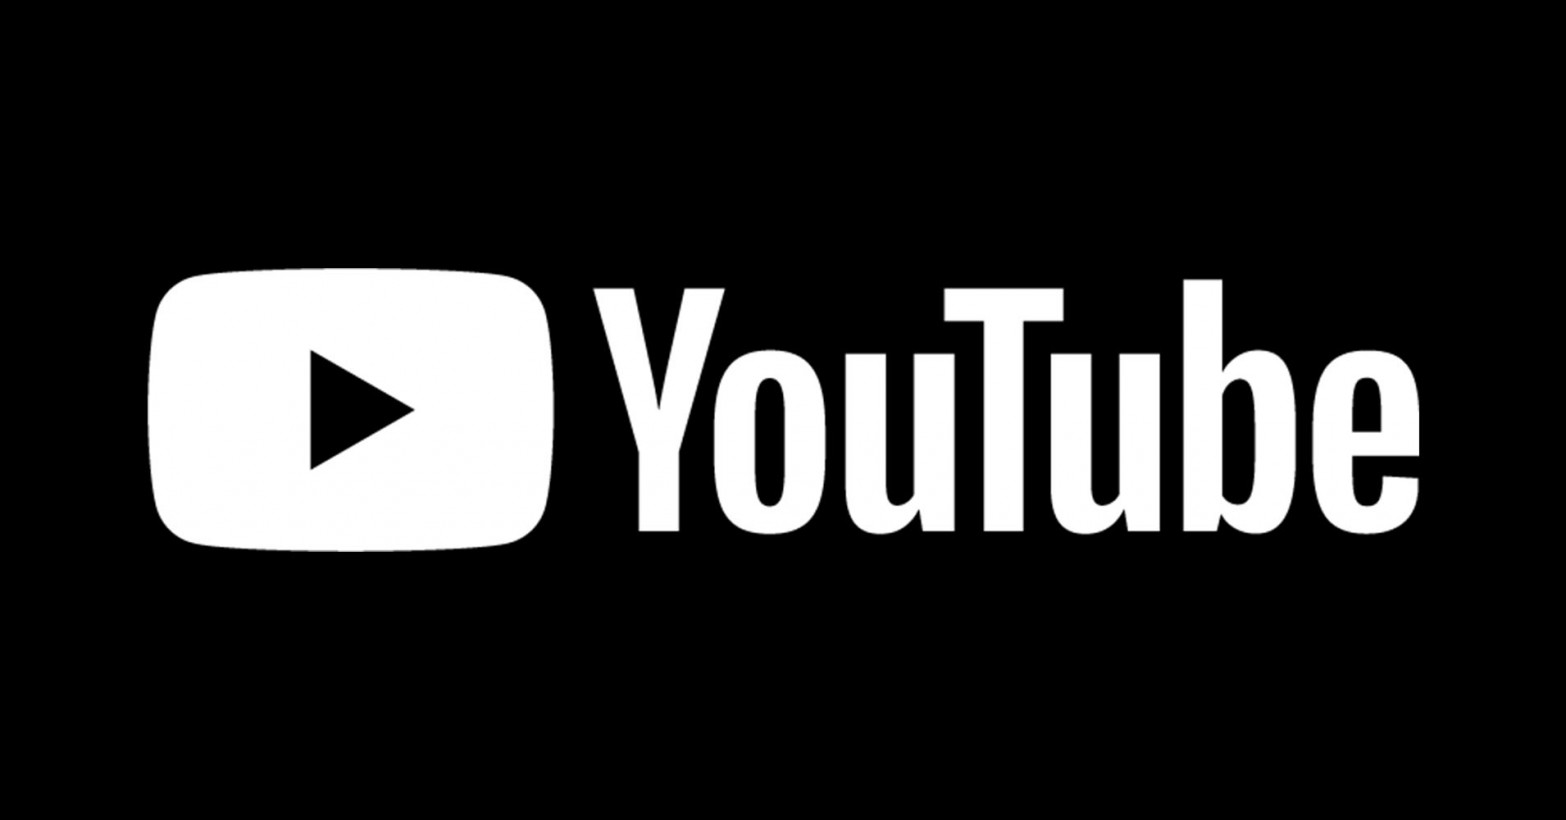 Pre-load YouTube videos to watch offline